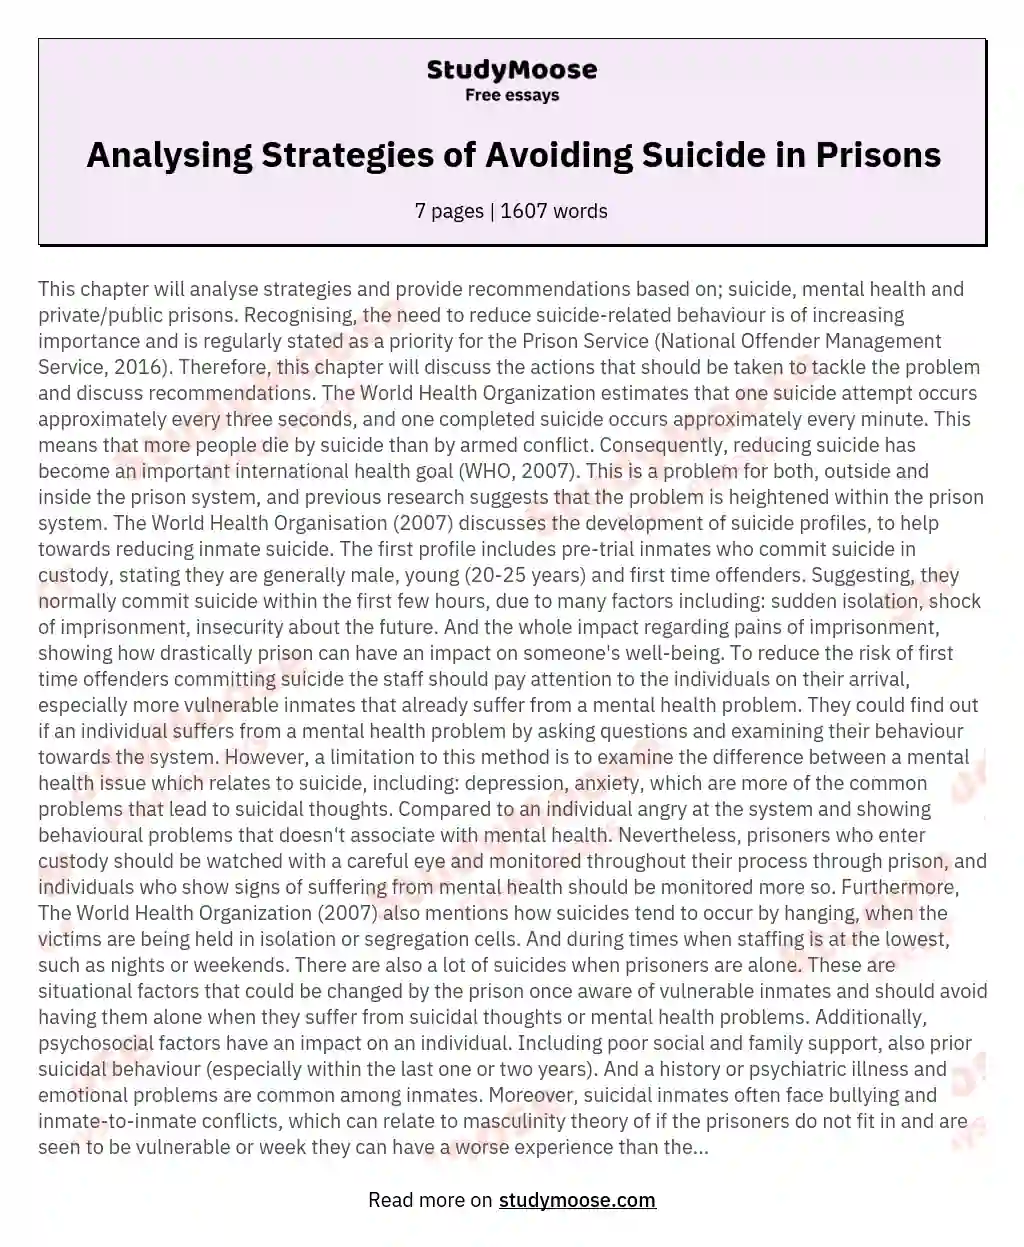 Analysing Strategies of Avoiding Suicide in Prisons essay